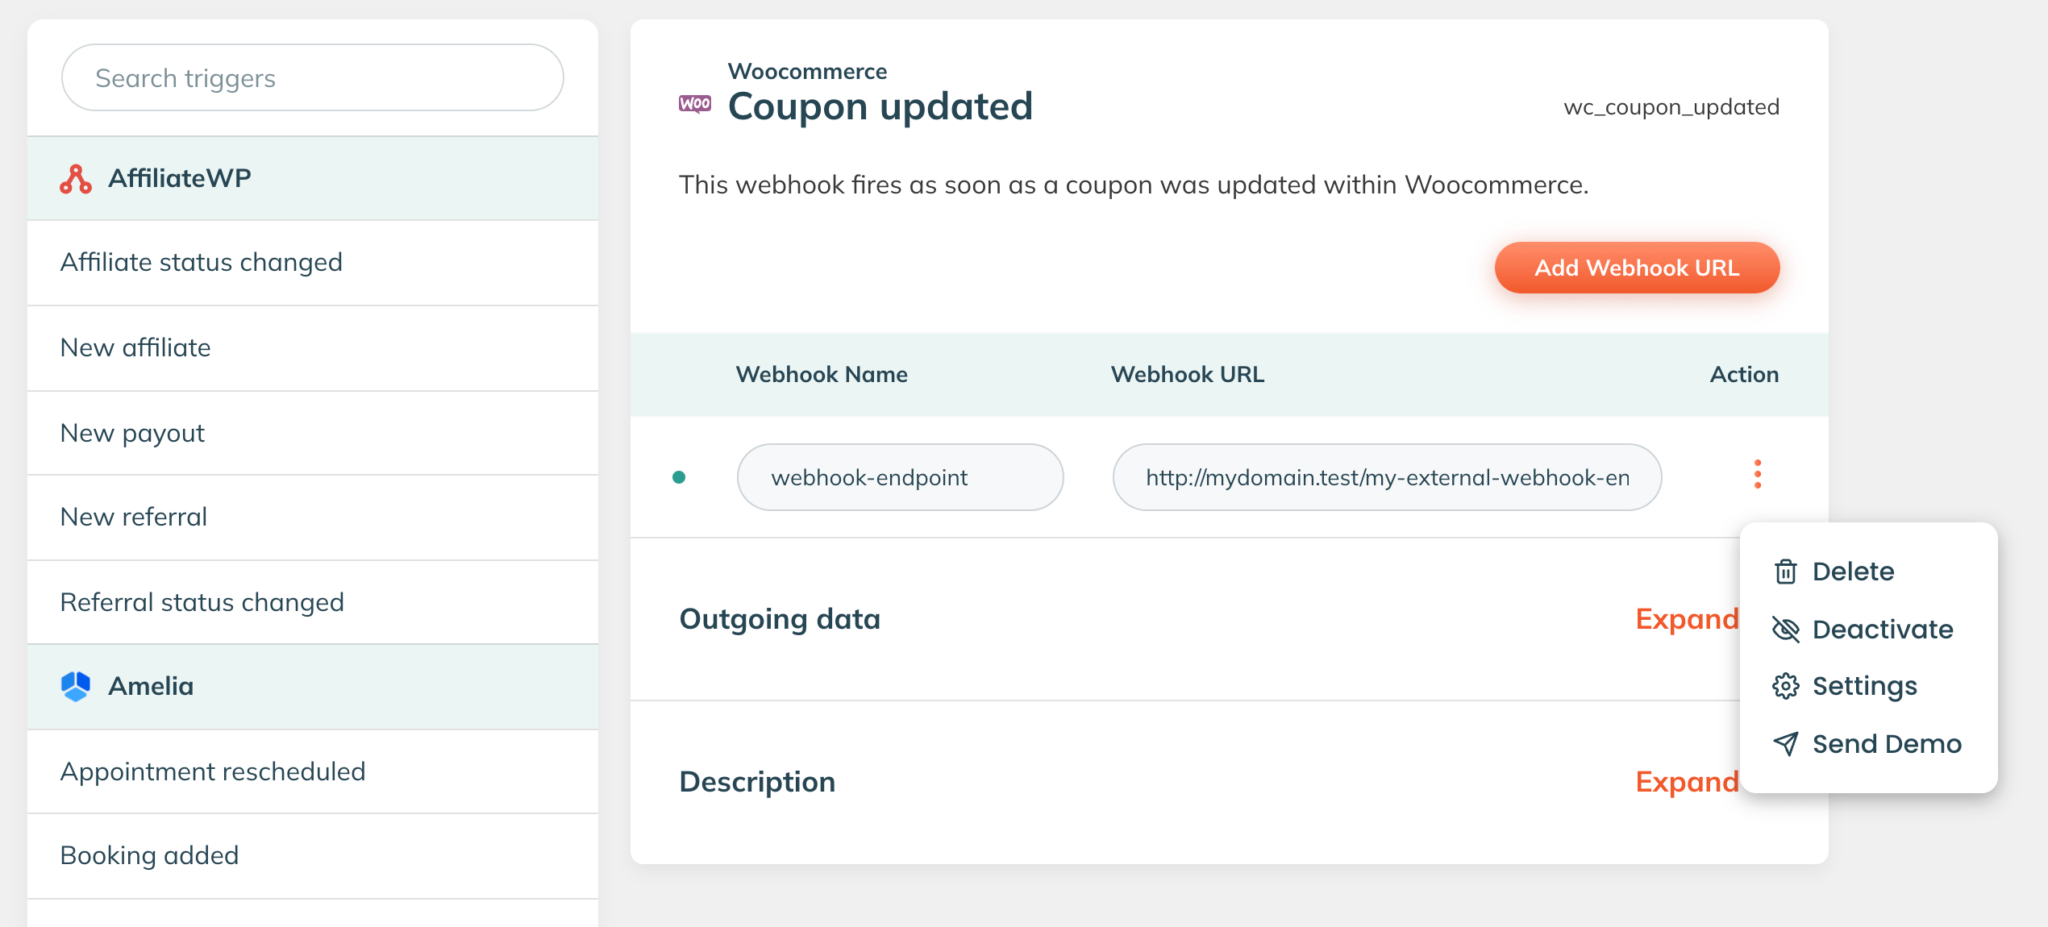 The WP Webhooks screen of the Paid membership expired trigger